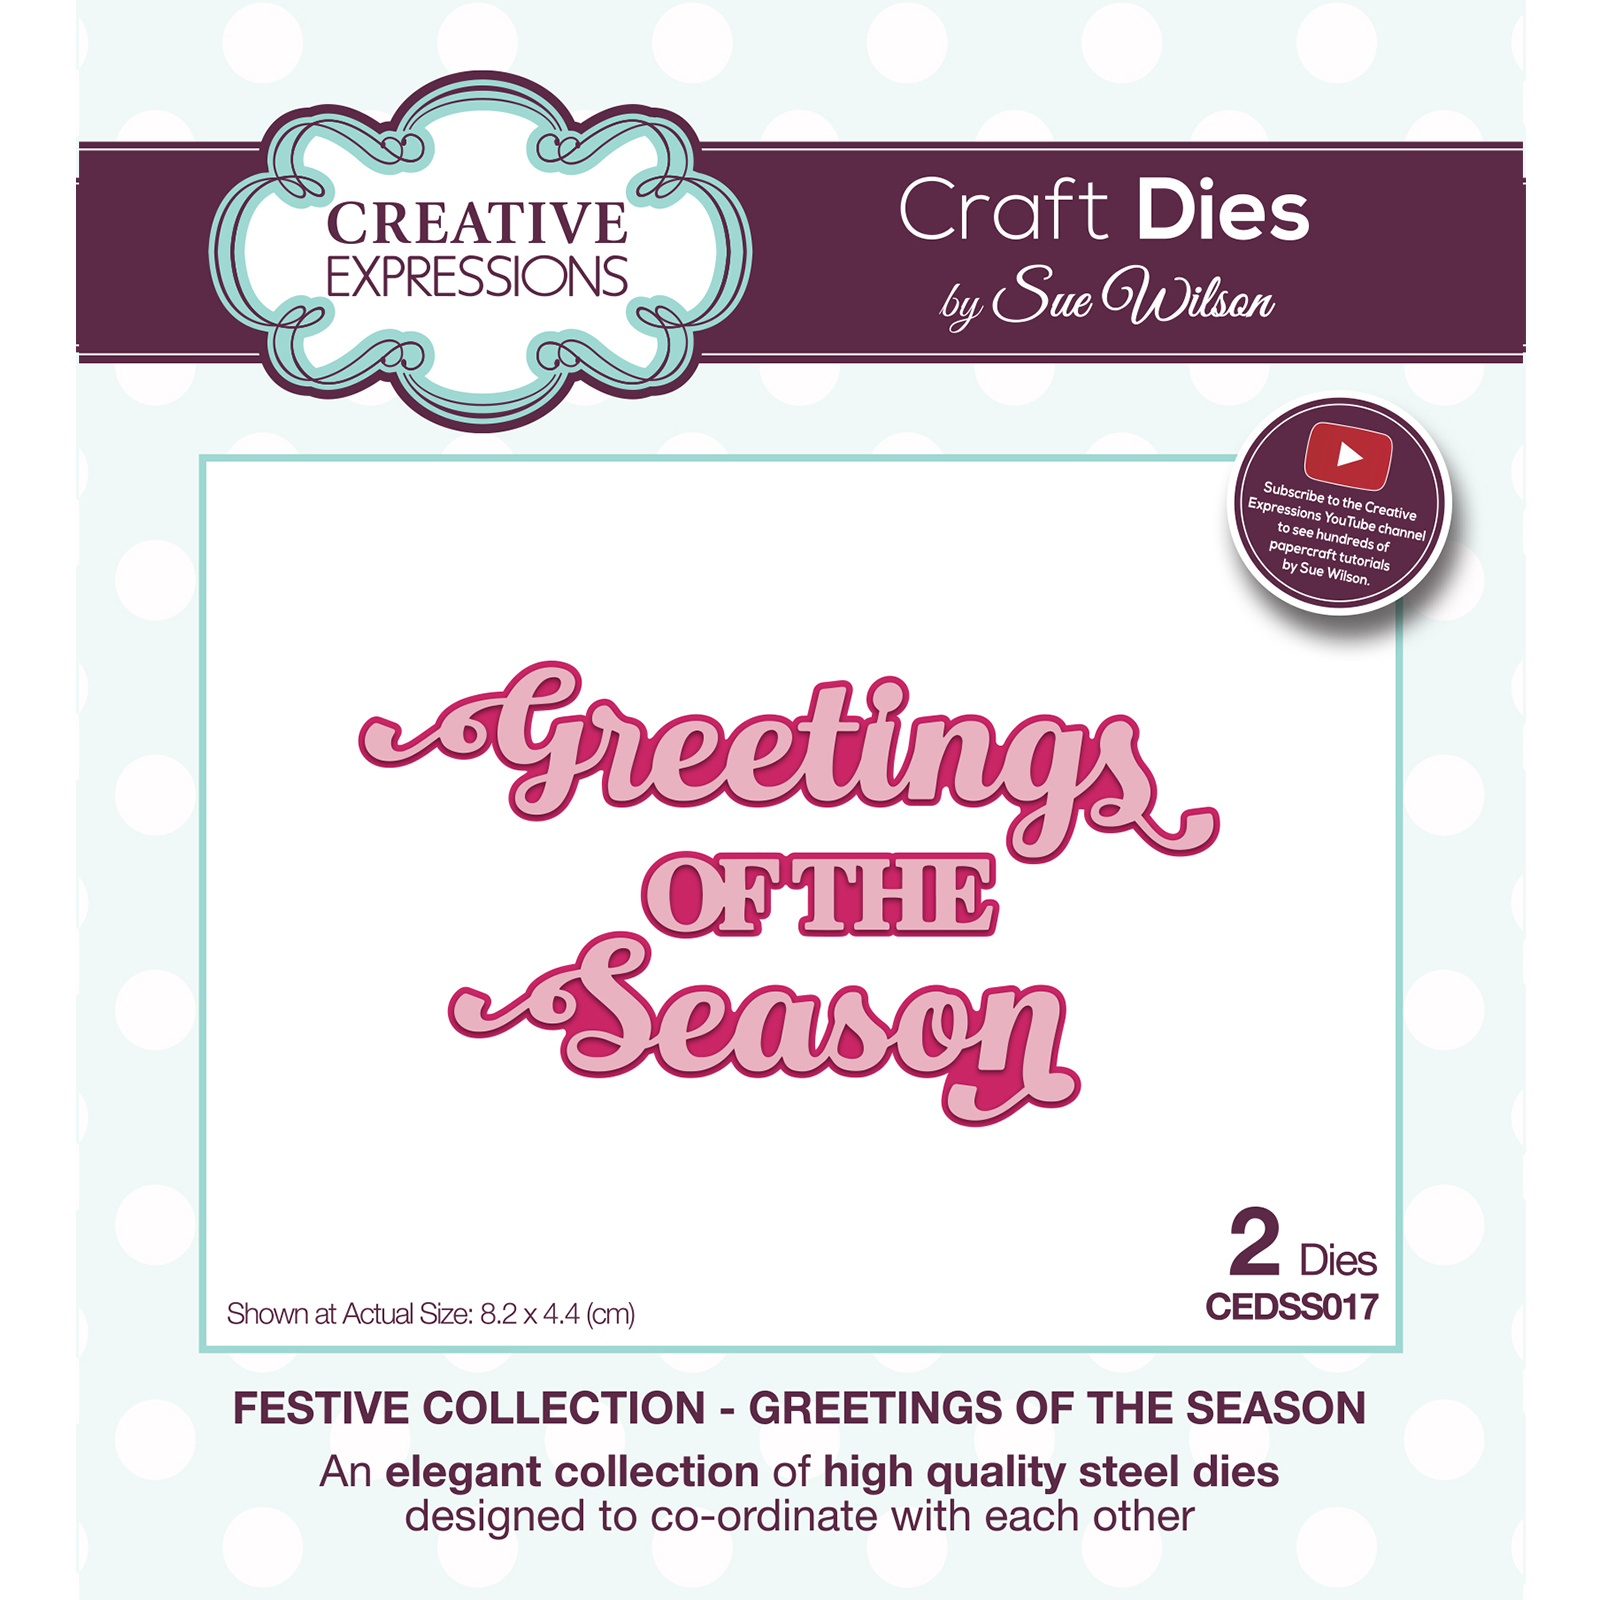 Creative Expressions • Sue Wilson Greetings of the season